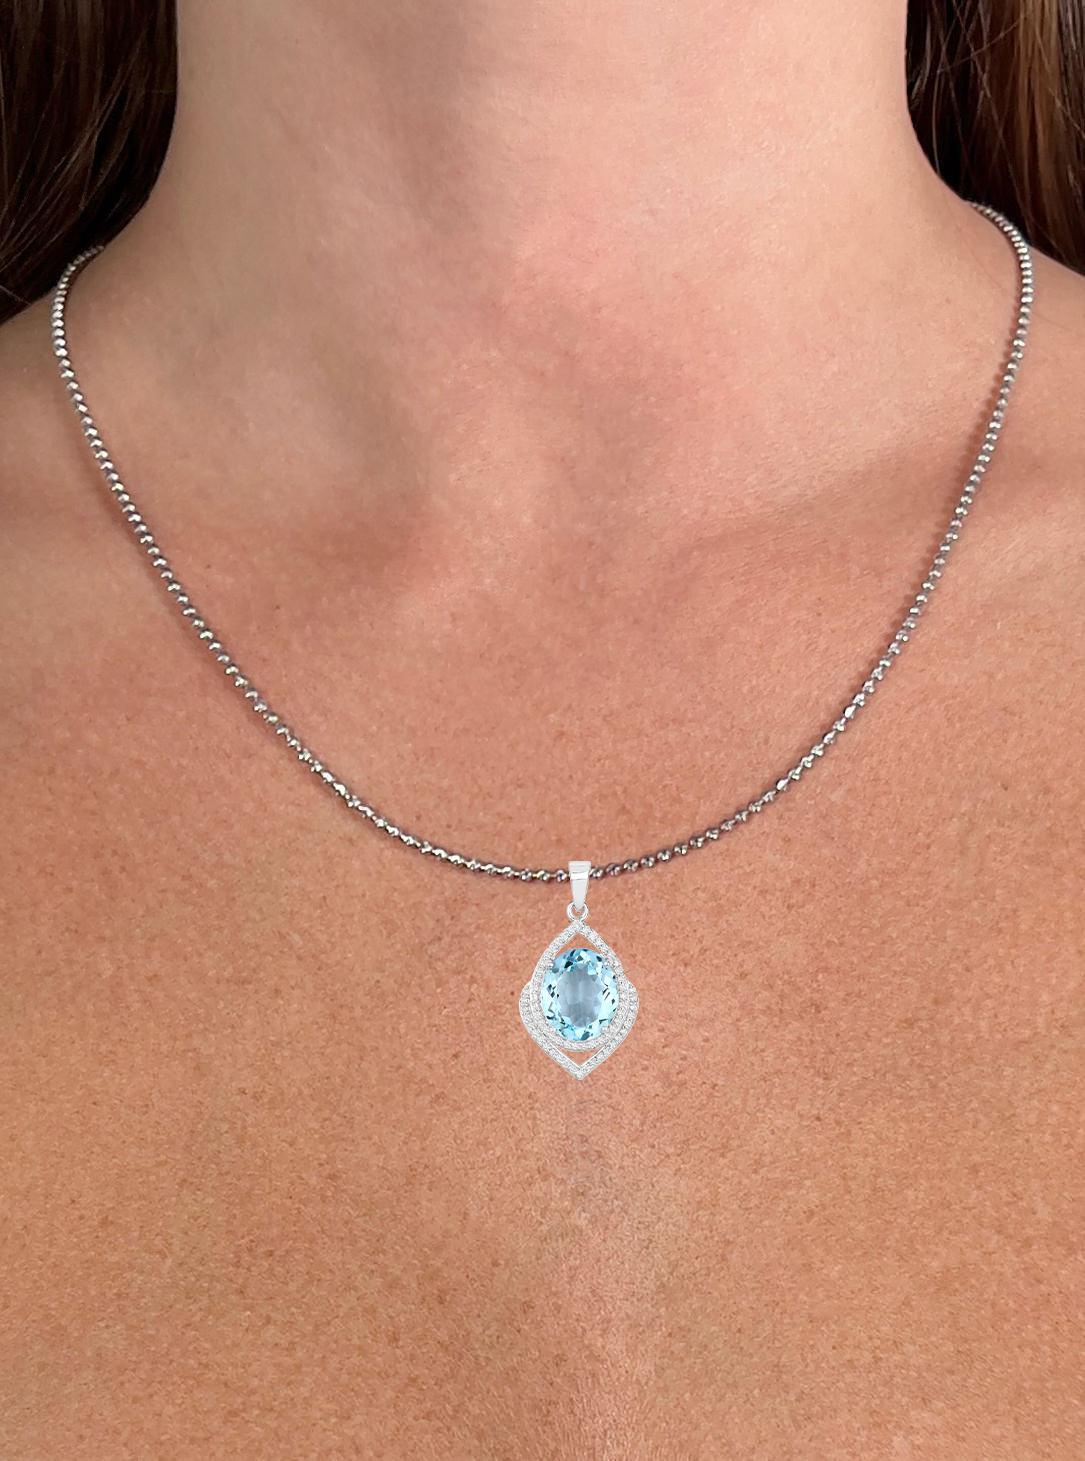 Oval Cut Aquamarine Pendant Necklace Diamond Setting 3.86 Carats 14K White Gold In Excellent Condition For Sale In Laguna Niguel, CA